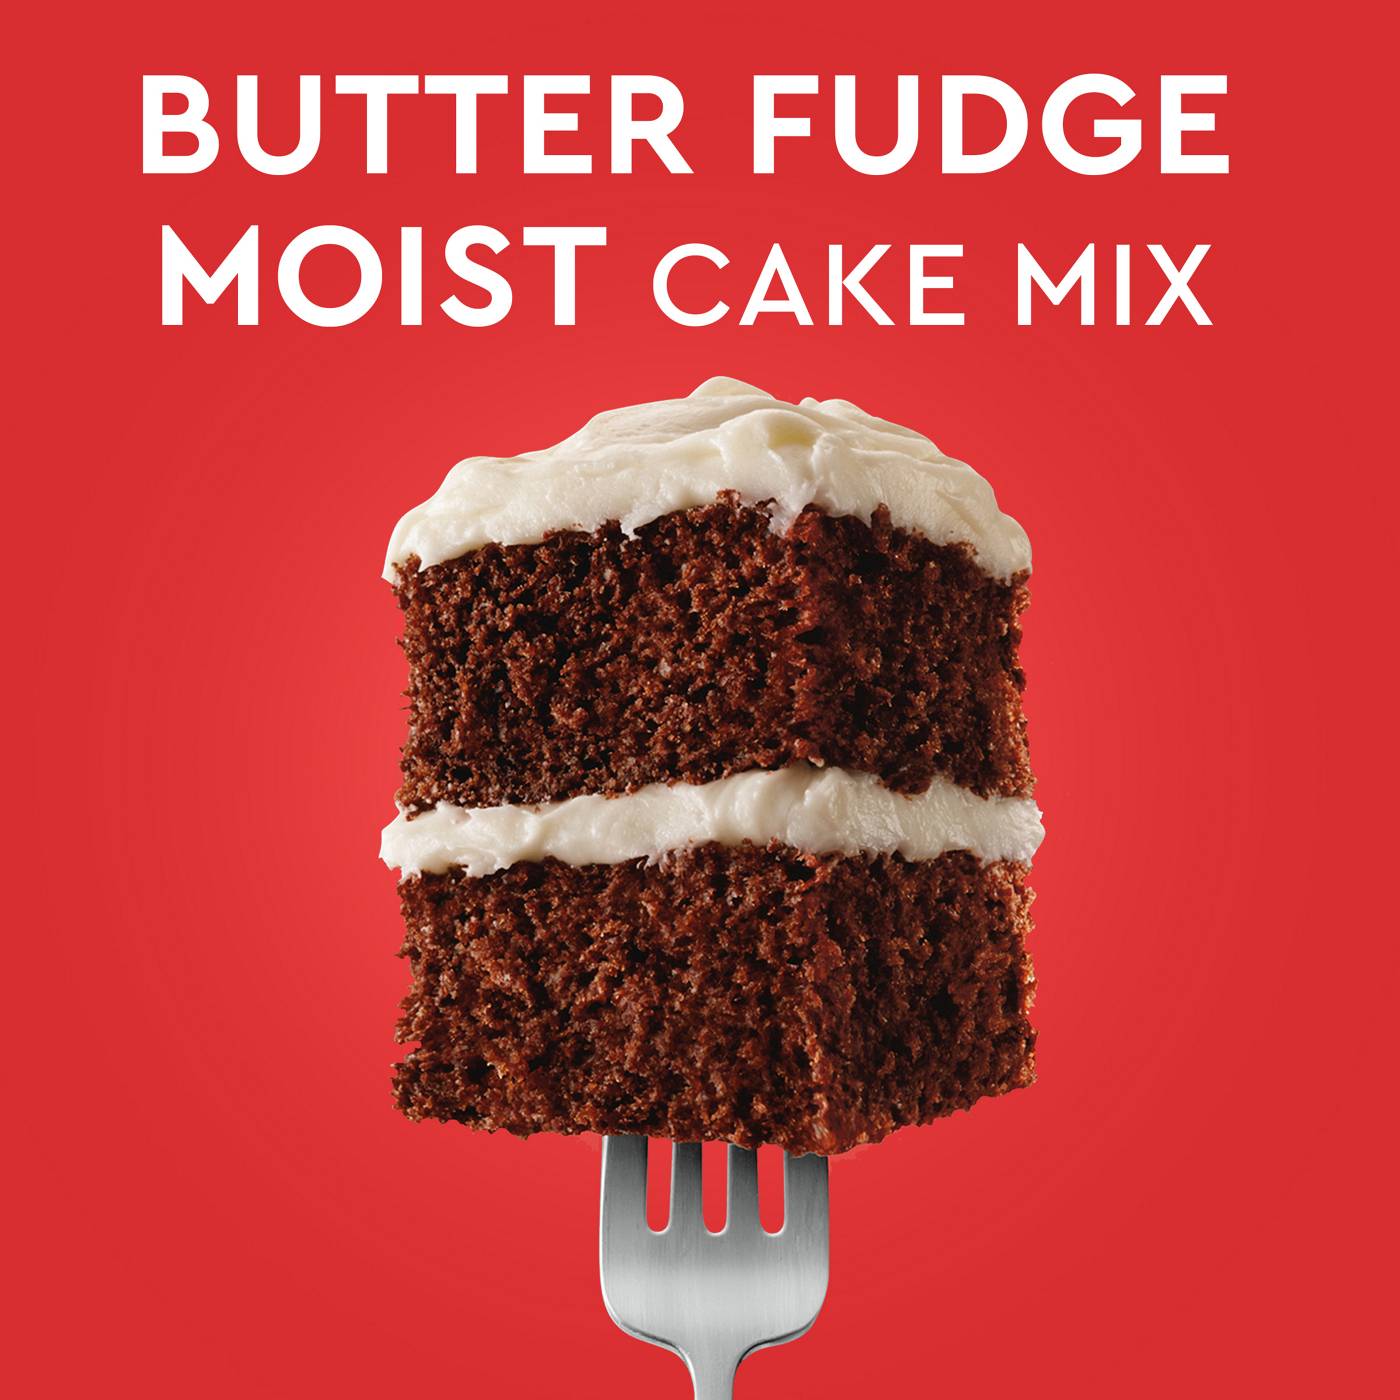 Duncan Hines Perfectly Moist Butter Recipe Fudge Cake Mix; image 6 of 7